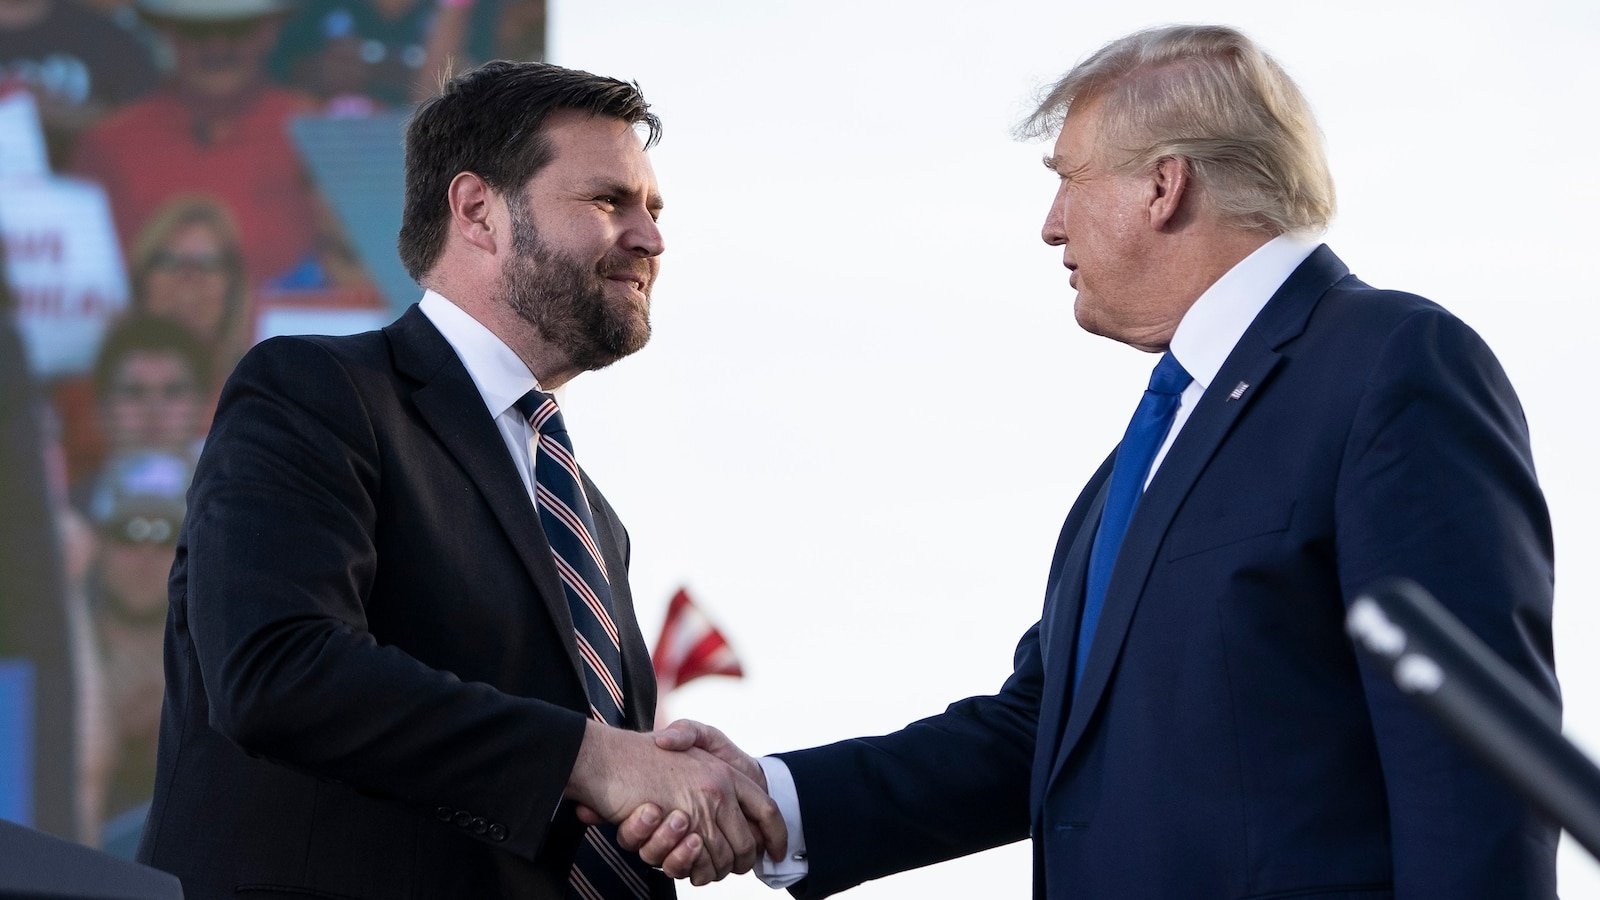 By picking J.D. Vance for VP, Trump doubles down on Trumpism